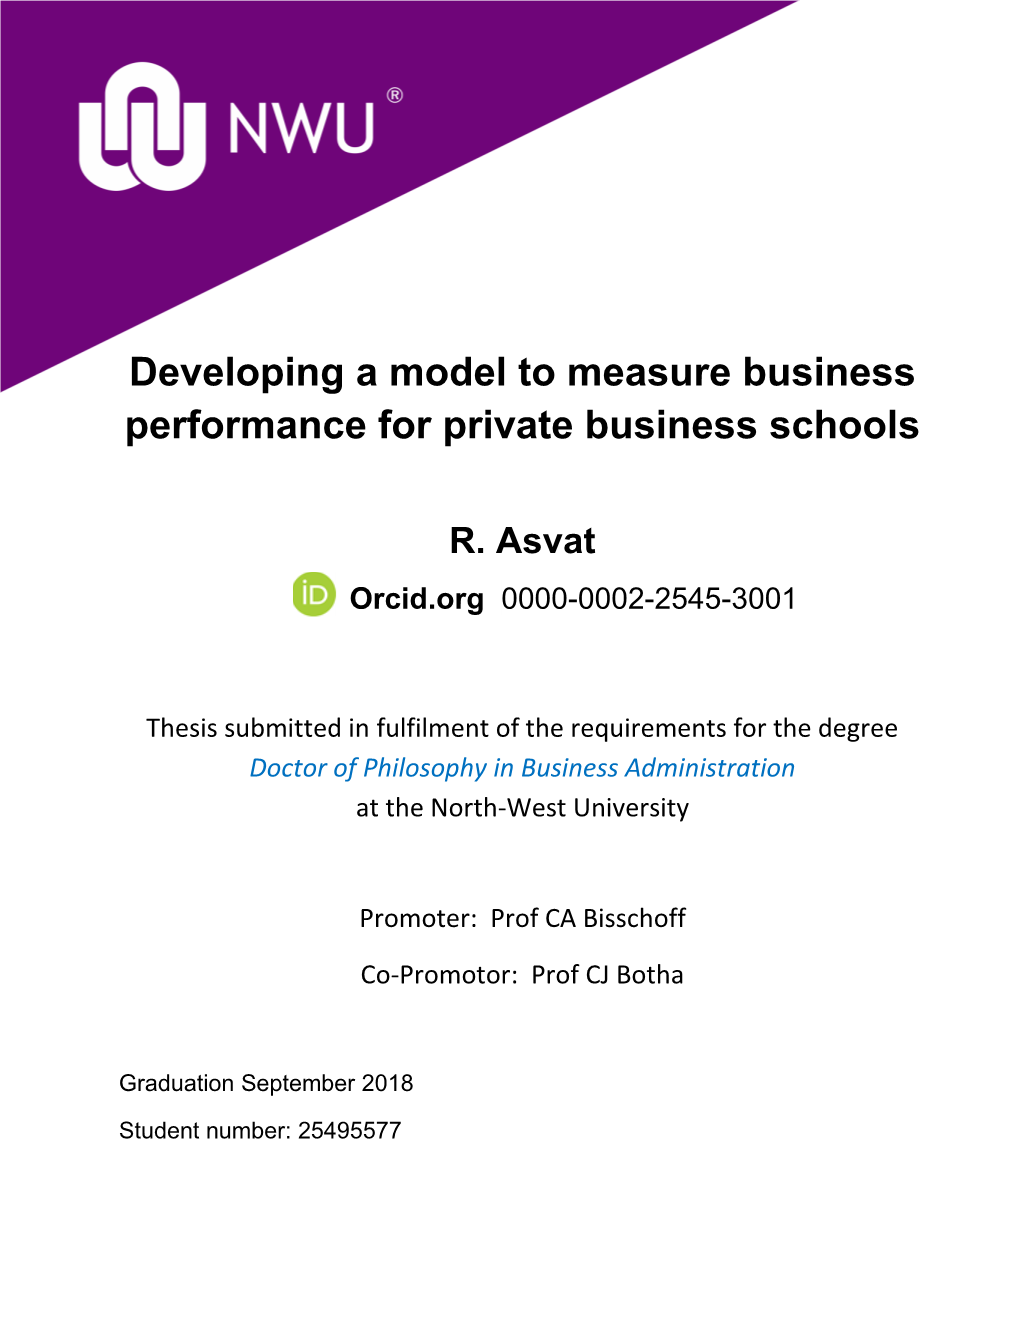 Developing a Model to Measure Business Performance for Private Business Schools